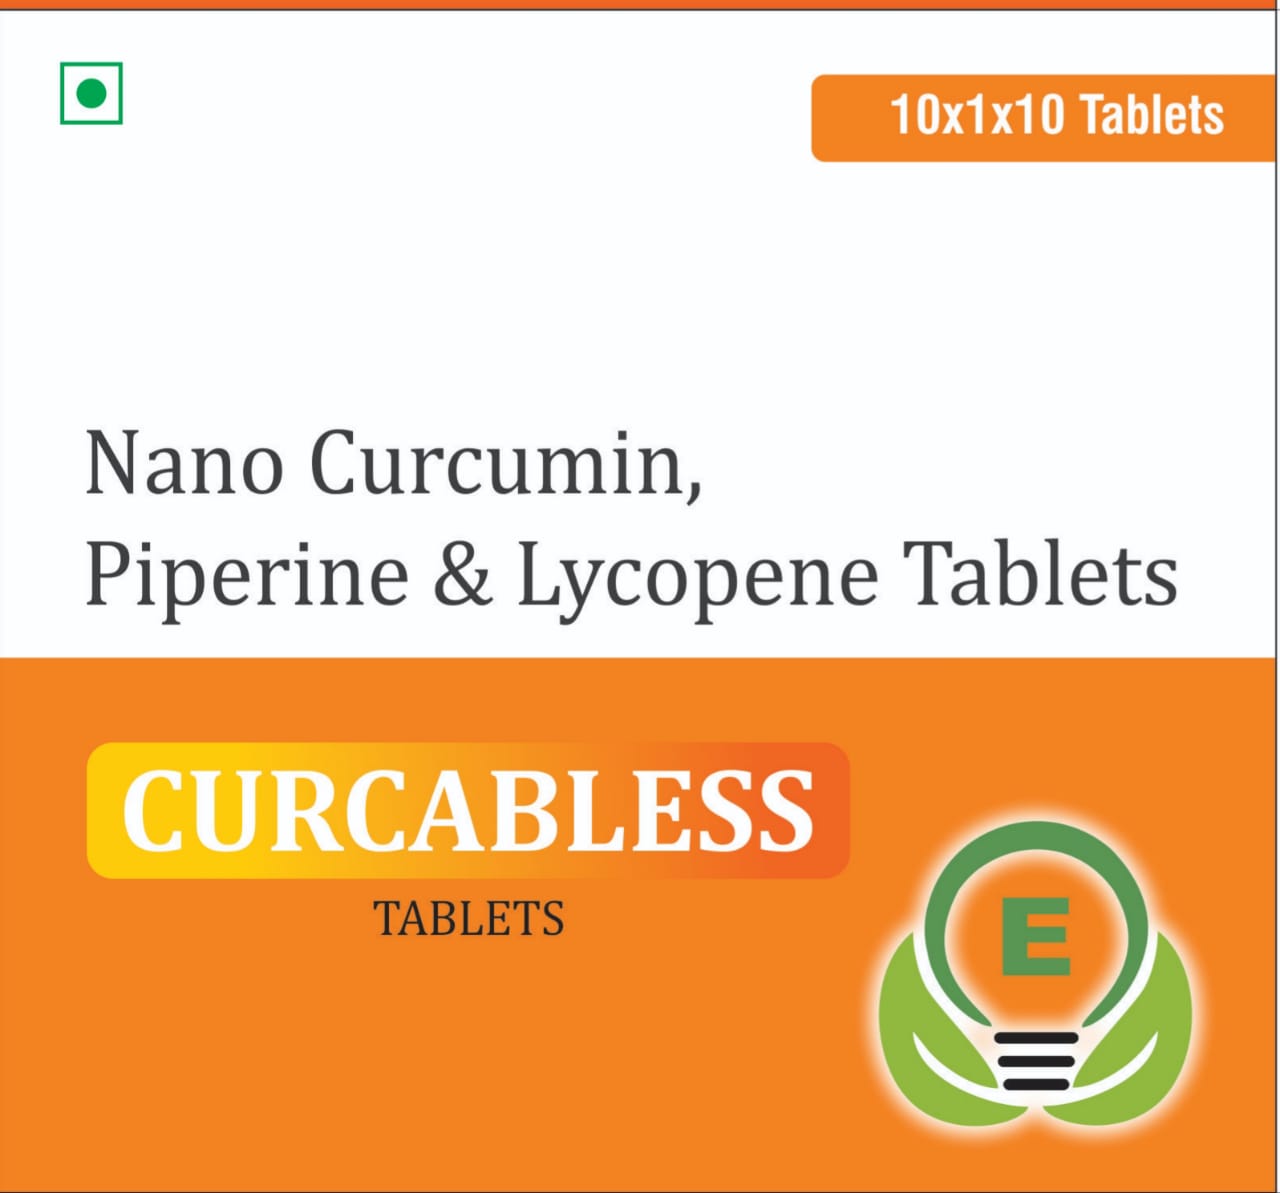 CURCABLESS Tablets